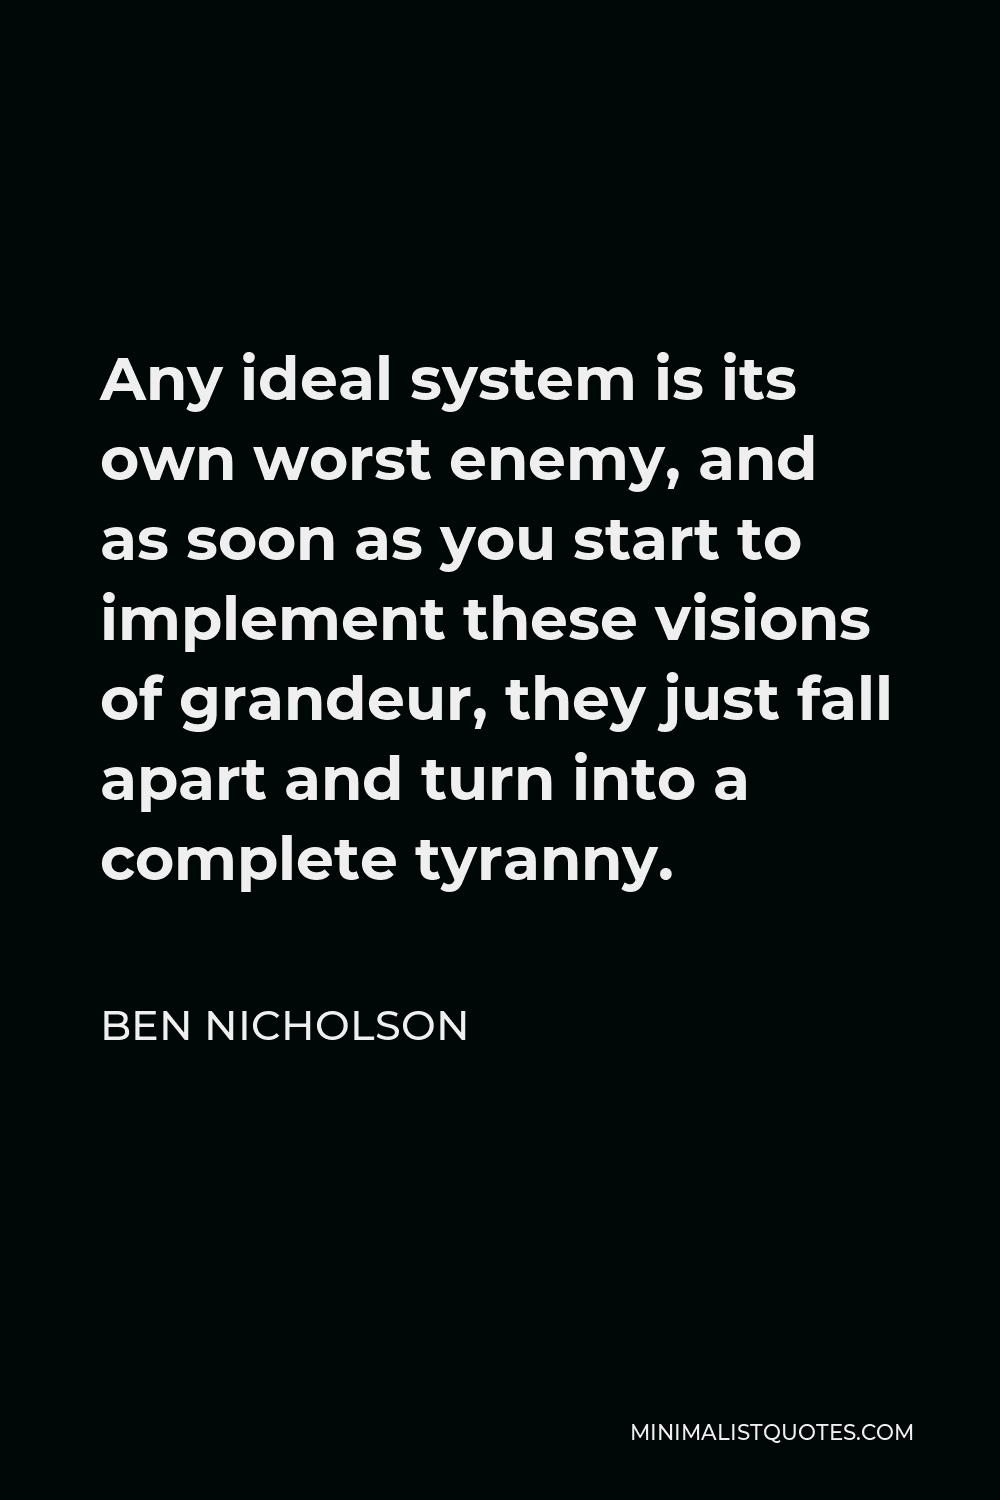 Ben Nicholson Quote - Any ideal system is its own worst enemy, and as soon as you start to implement these visions of grandeur, they just fall apart and turn into a complete tyranny.